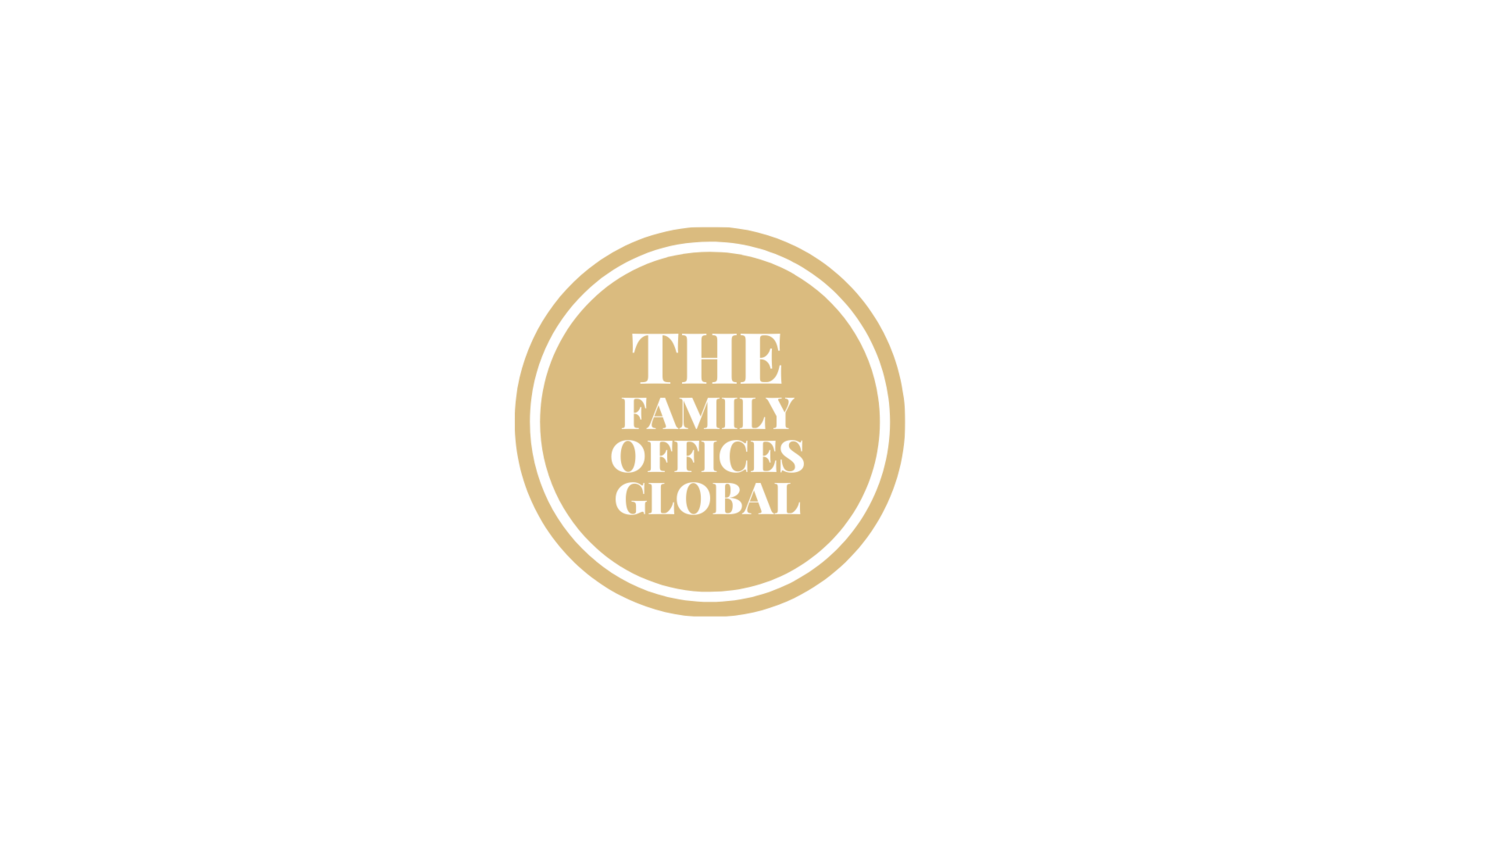 The Family Offices Global